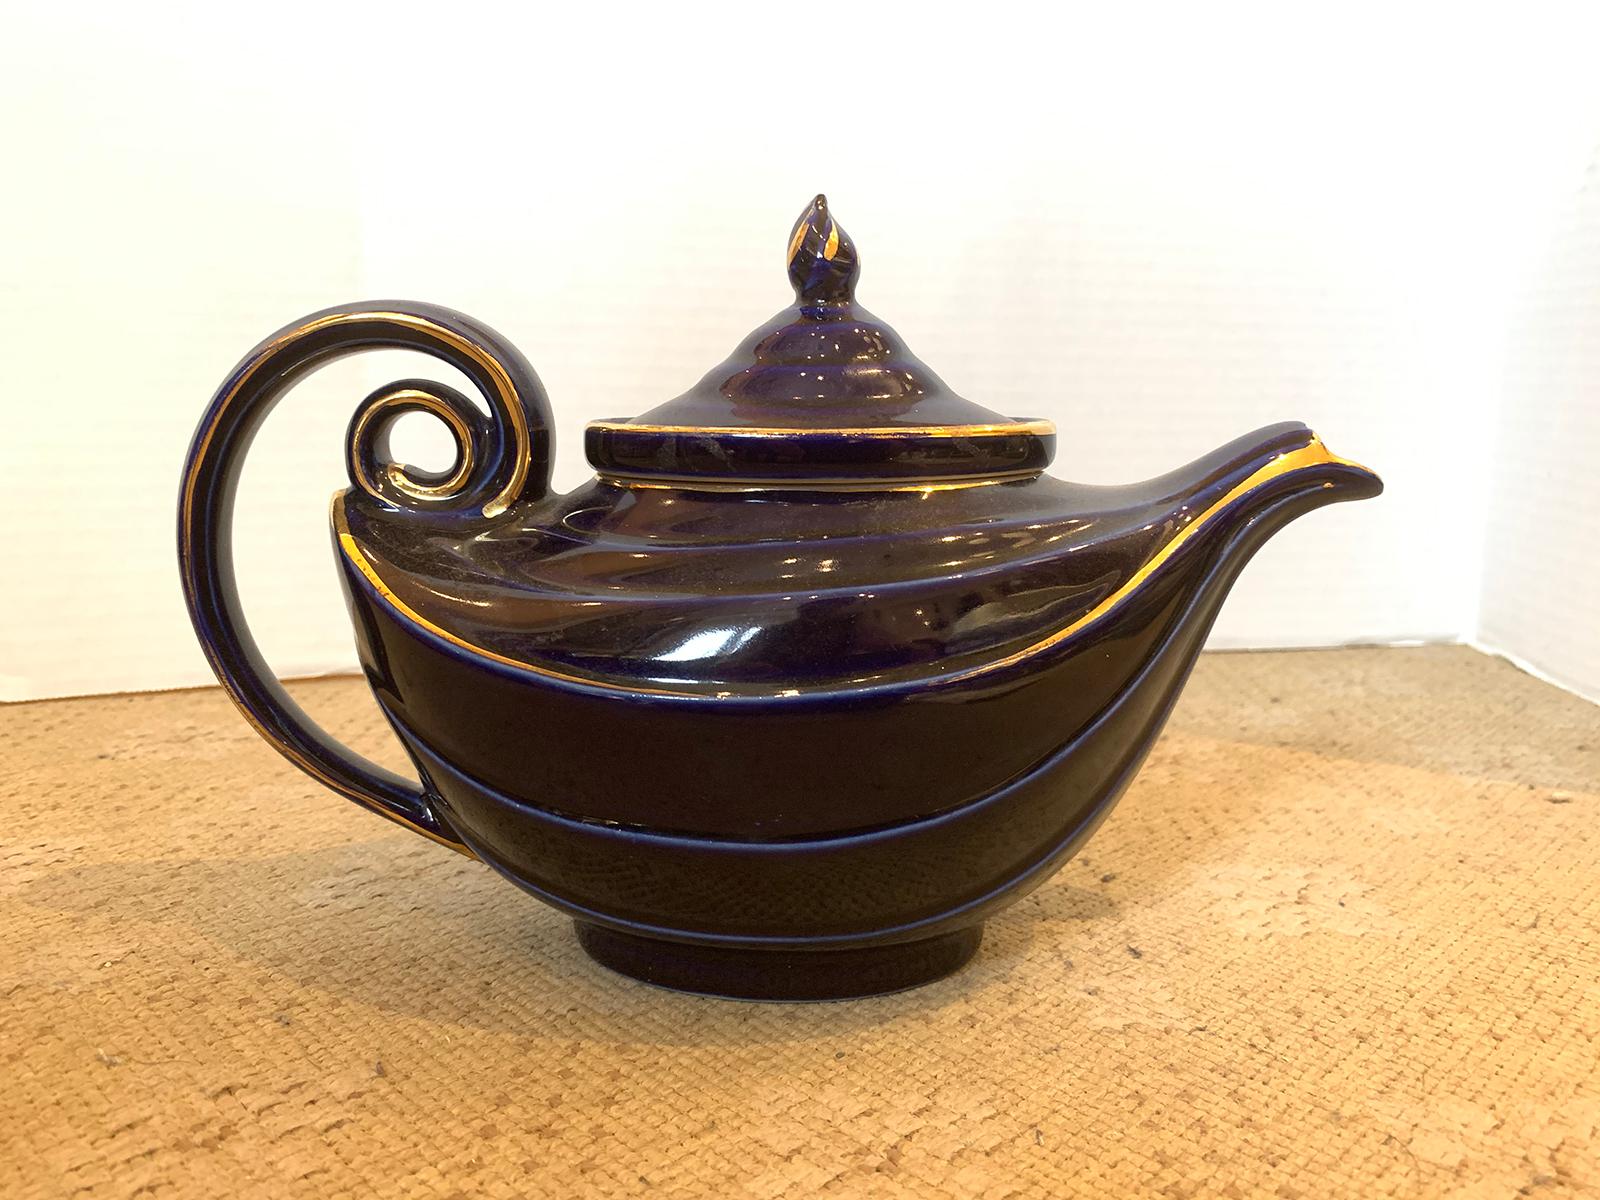 20th century American hall china cobalt and gilt lidded teapot, marked 